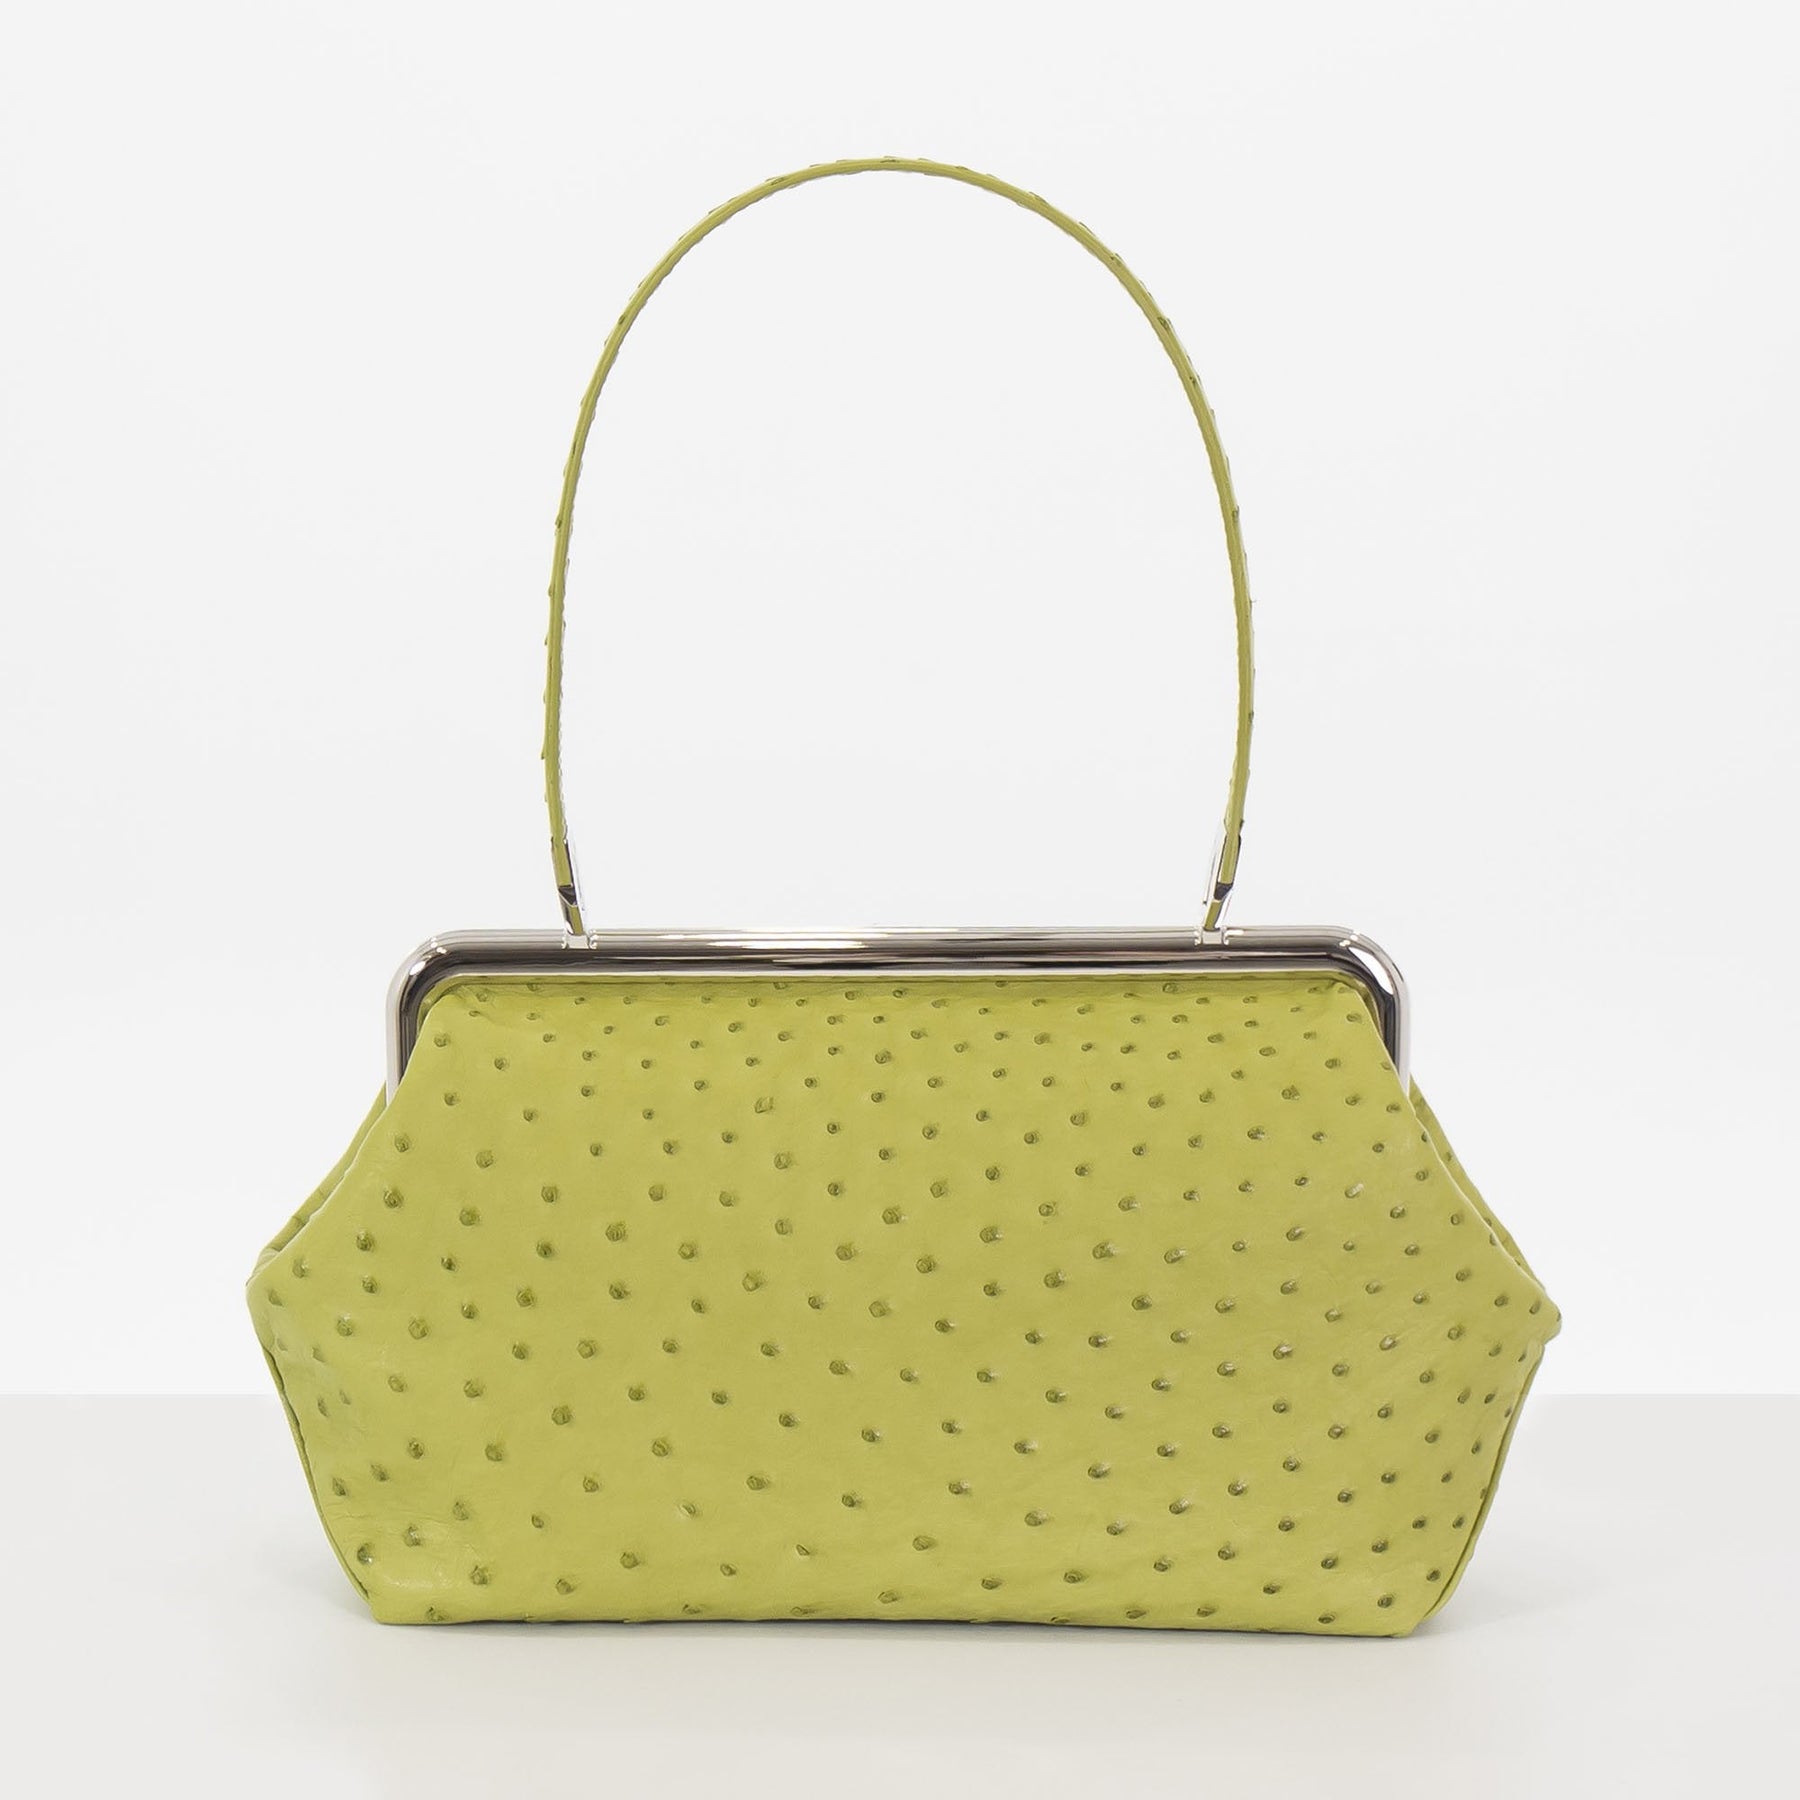 LUNA in Chartreuse Ostrich-DOTTI Luxury Handbag, Made in Italy